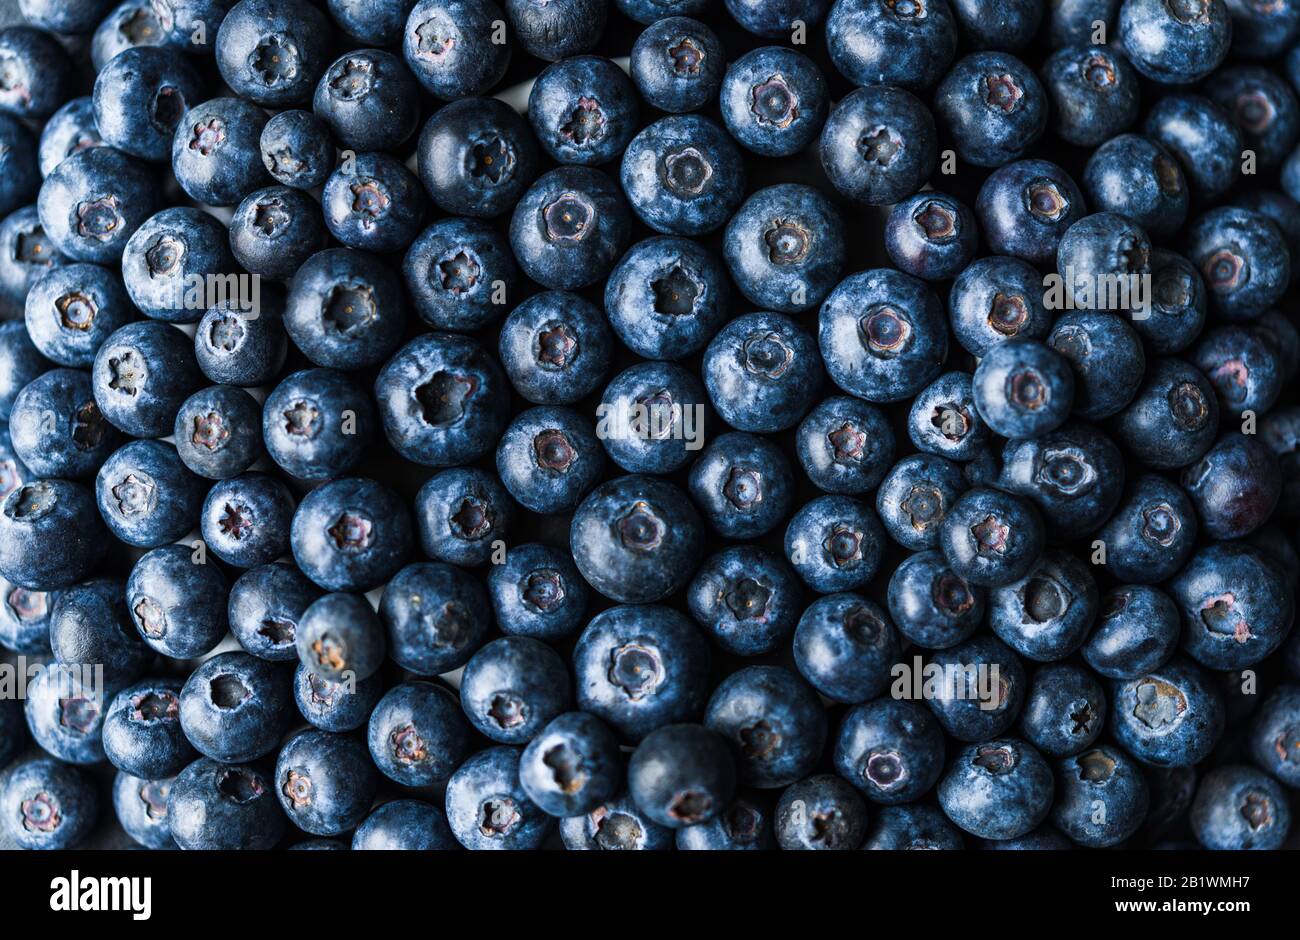 Flat lay up above view of fresh organic blueberries. Stock Photo